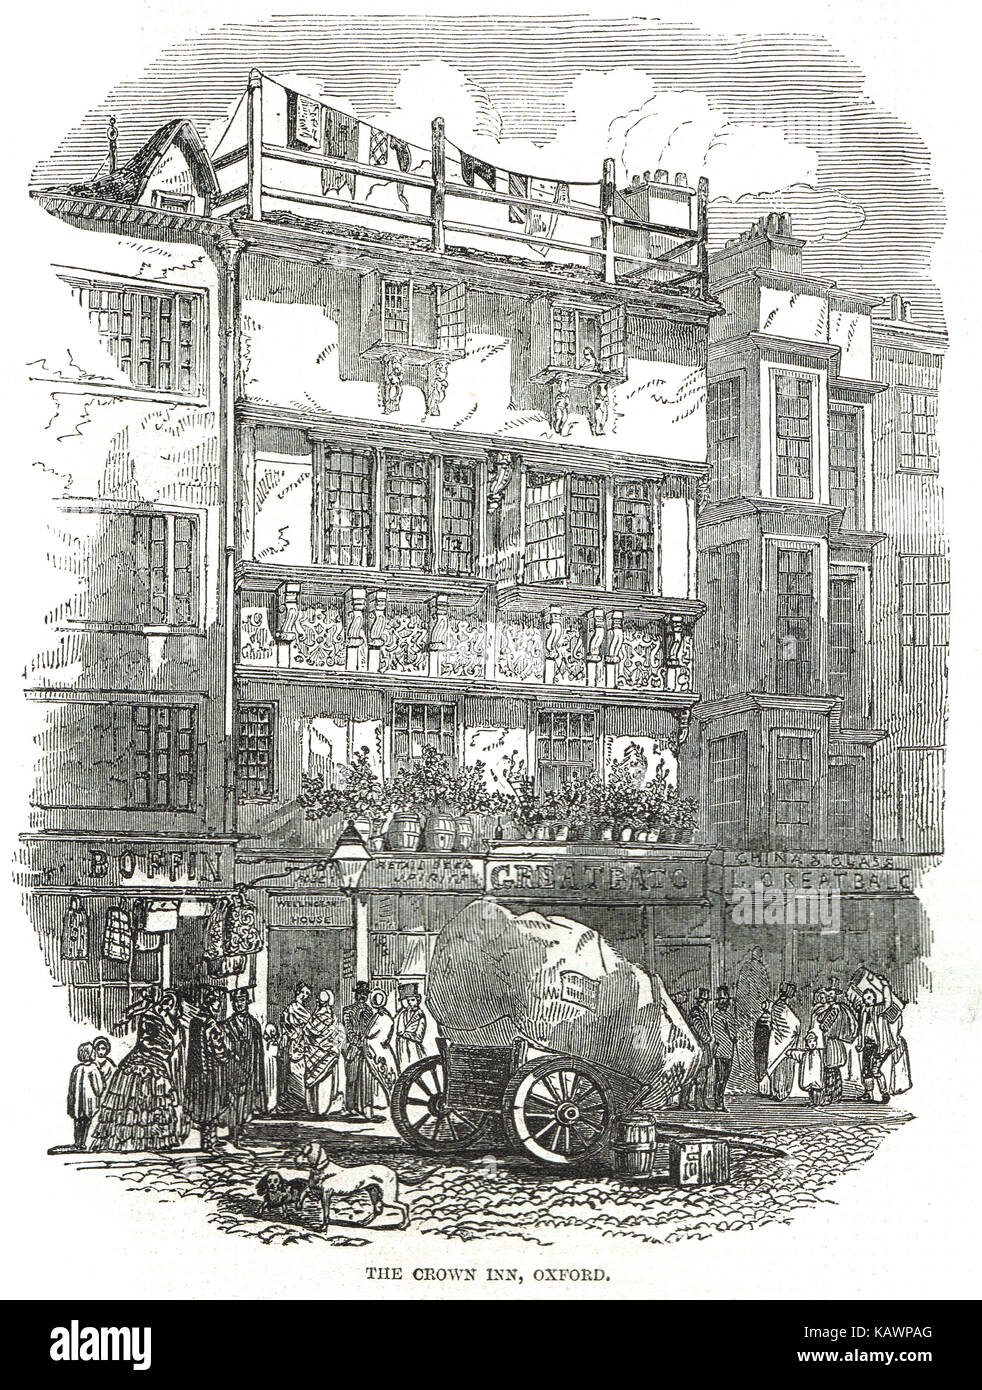 The Crown Tavern, Oxford where Shakespeare stayed, 1848 illustration Stock Photo